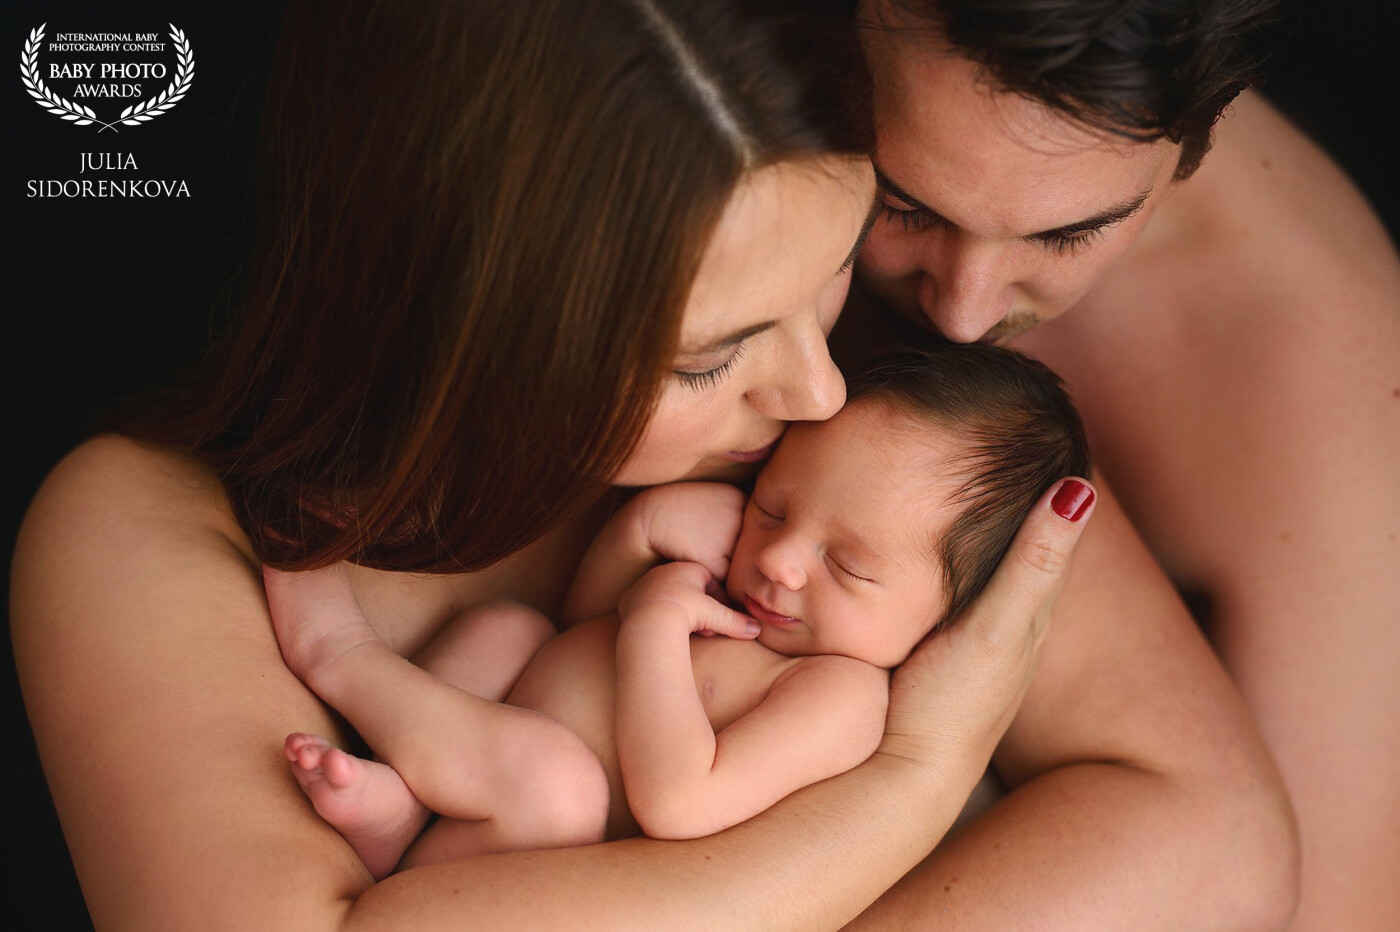 A very intimate moment during the newborn photosession. A lot of skin, warmth and love.